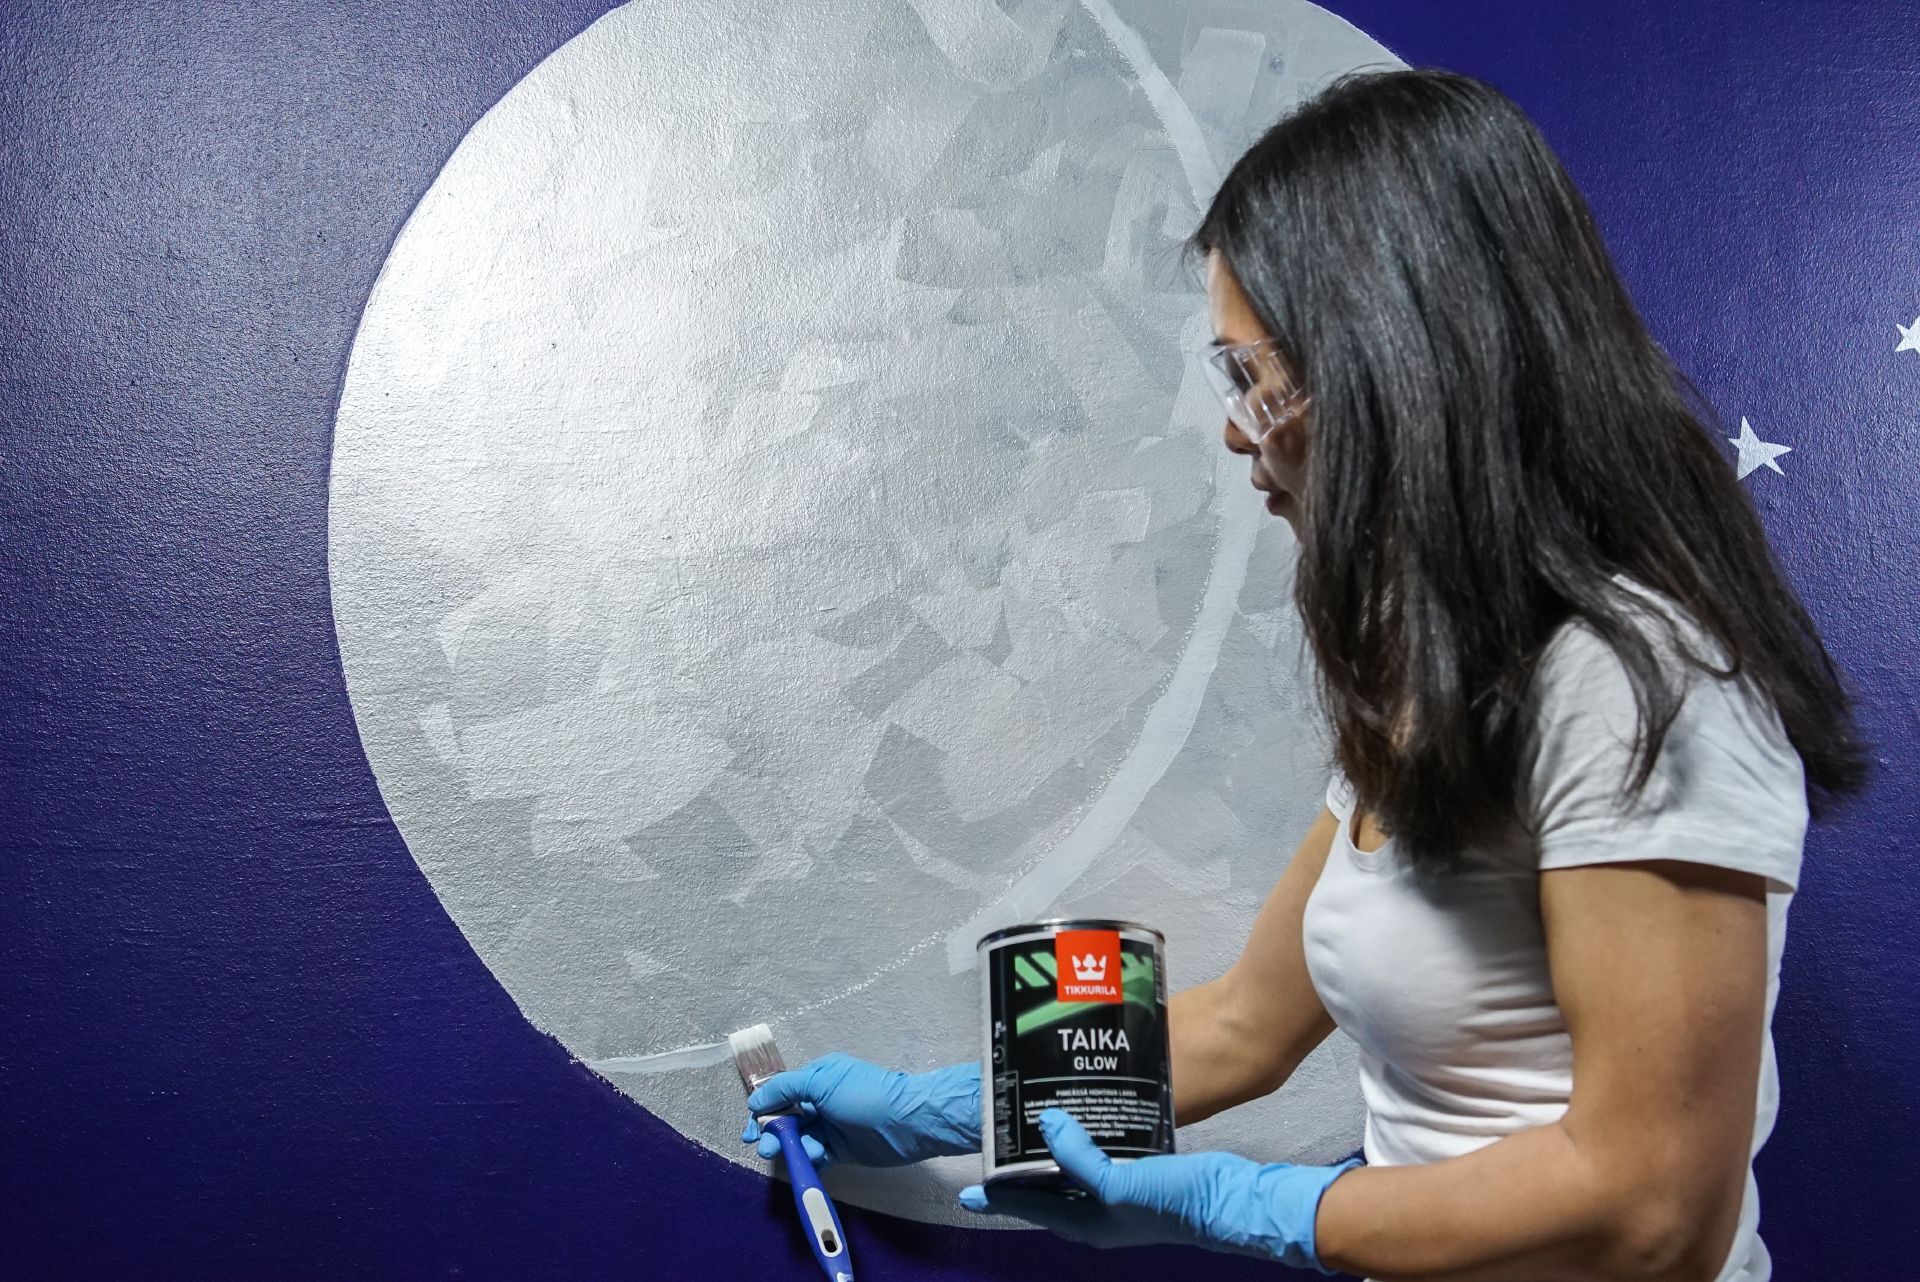 moon painted on wall